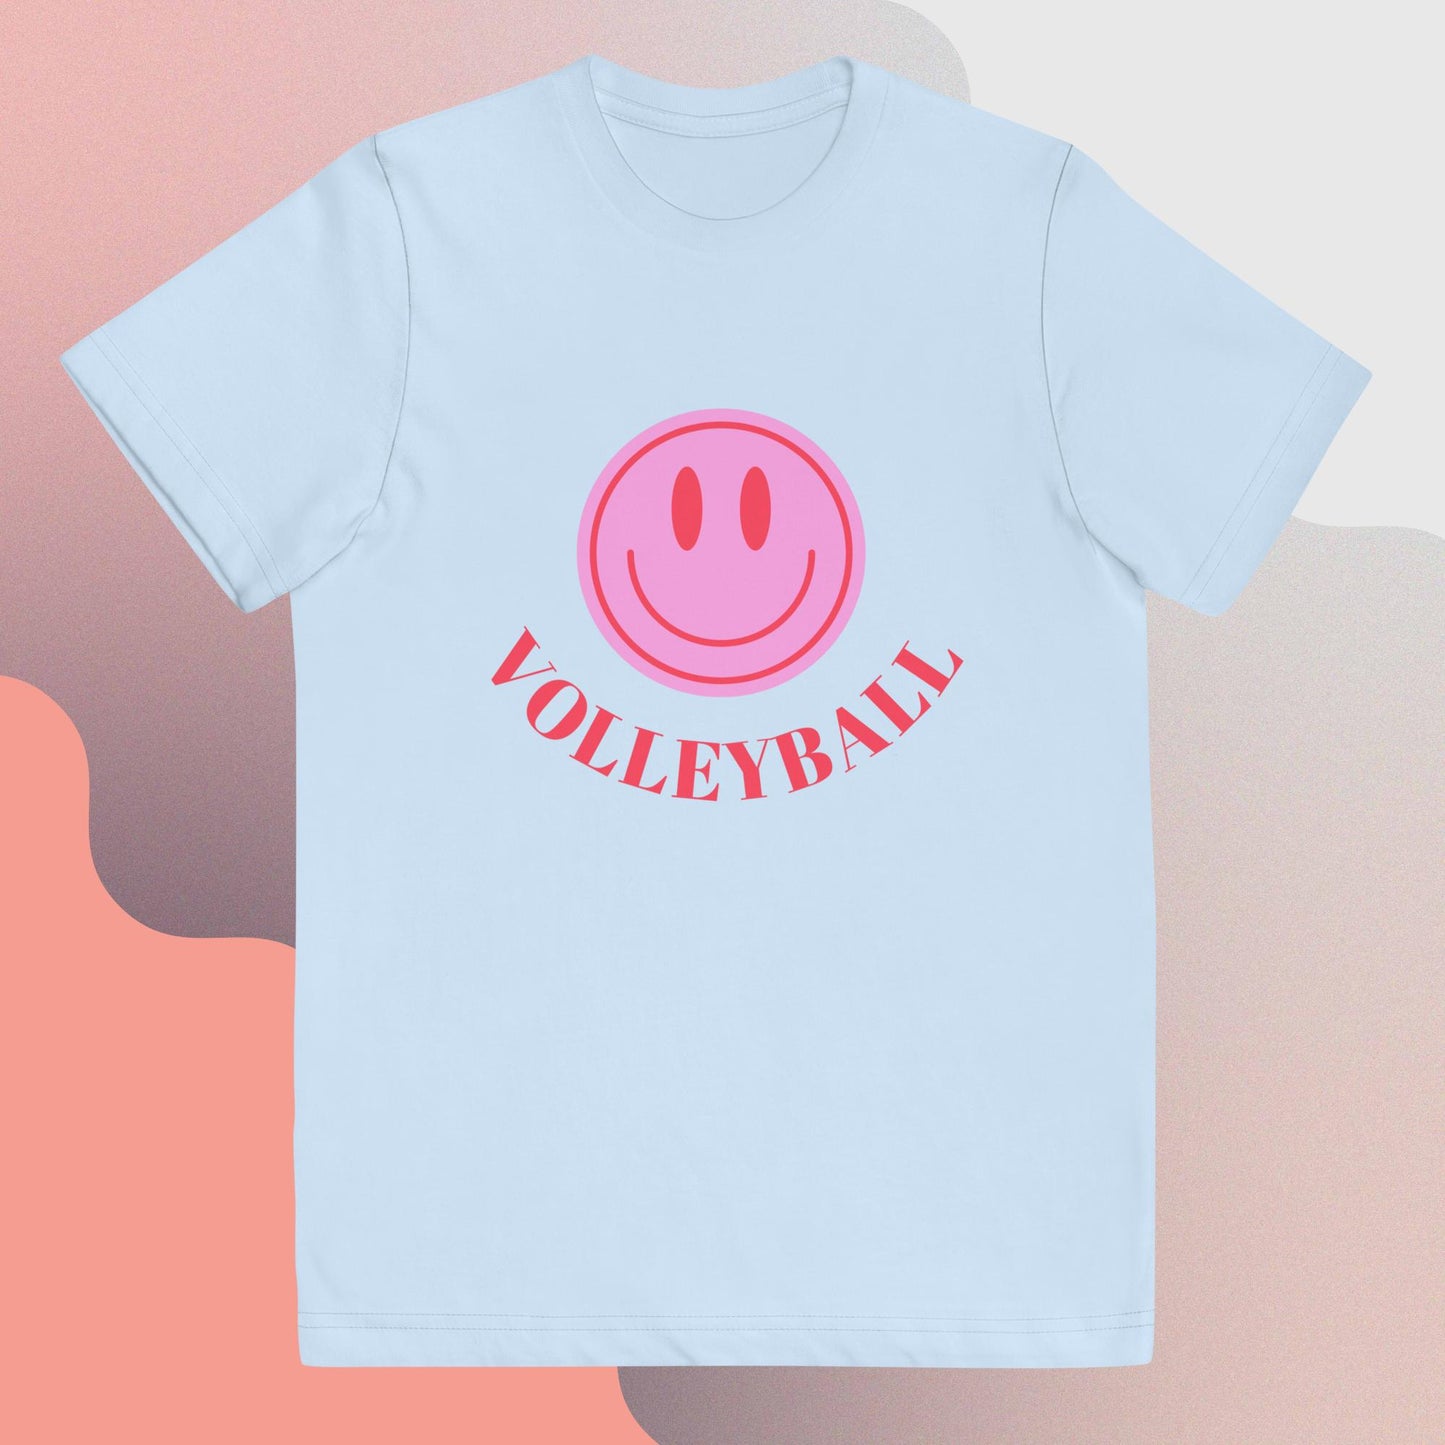 Smiley Vball Youth jersey t-shirt